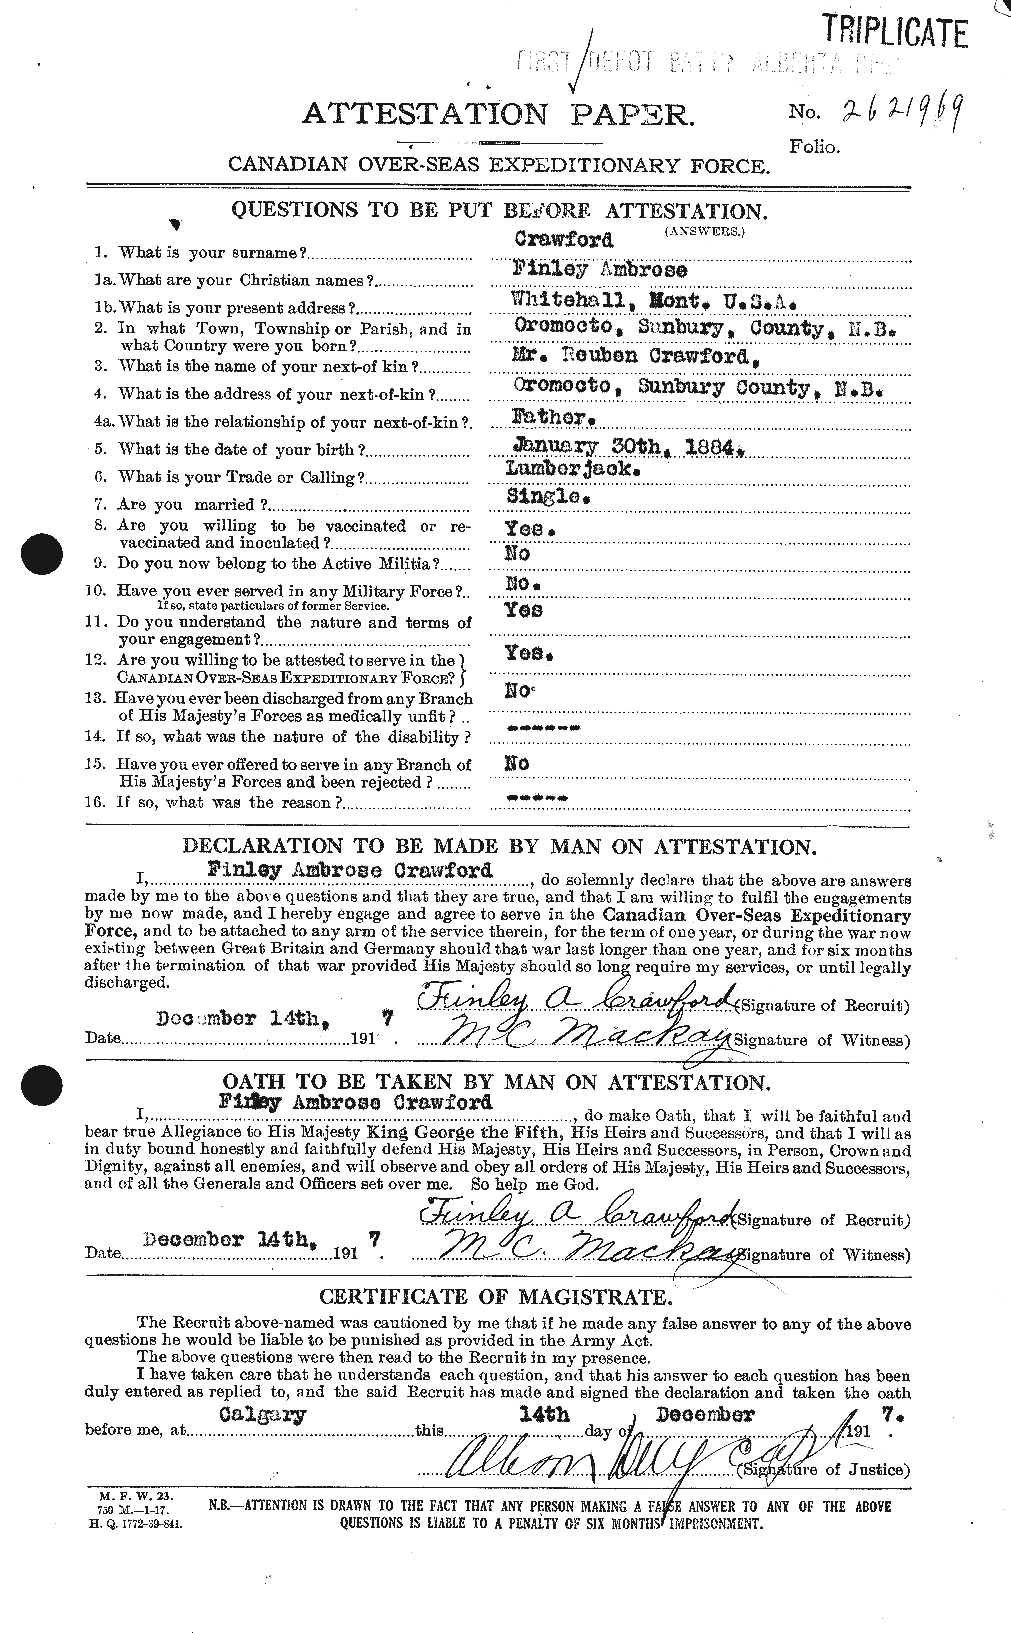 Personnel Records of the First World War - CEF 060741a